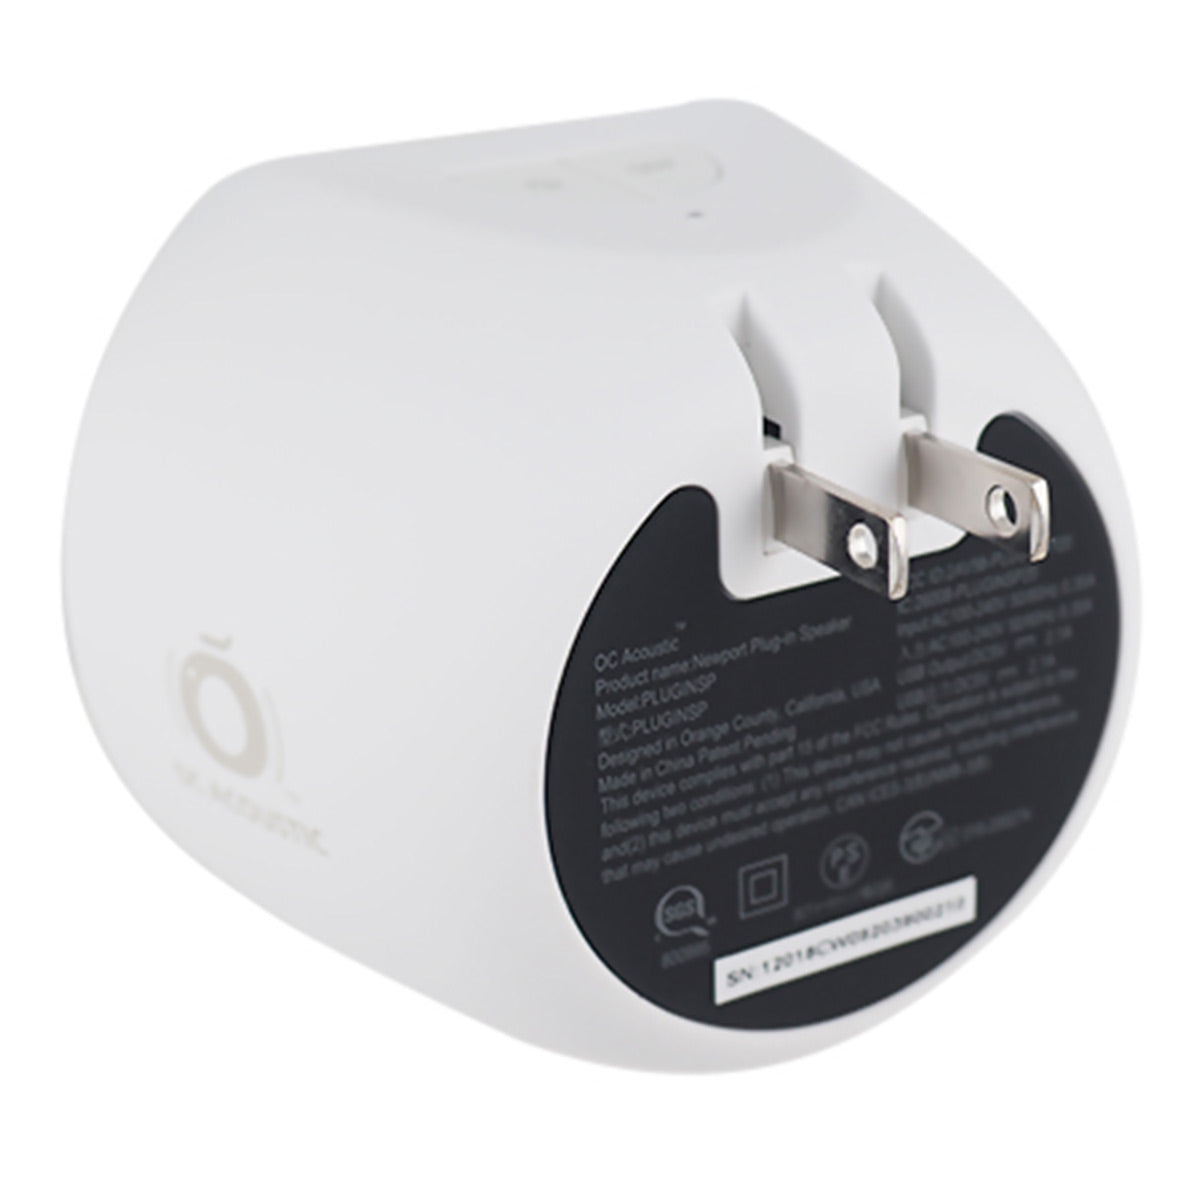 OC Acoustic Newport Plug-in Outlet Speaker with Bluetooth 5.1 and Built-in USB Type-A Charging Port (Gray/White)